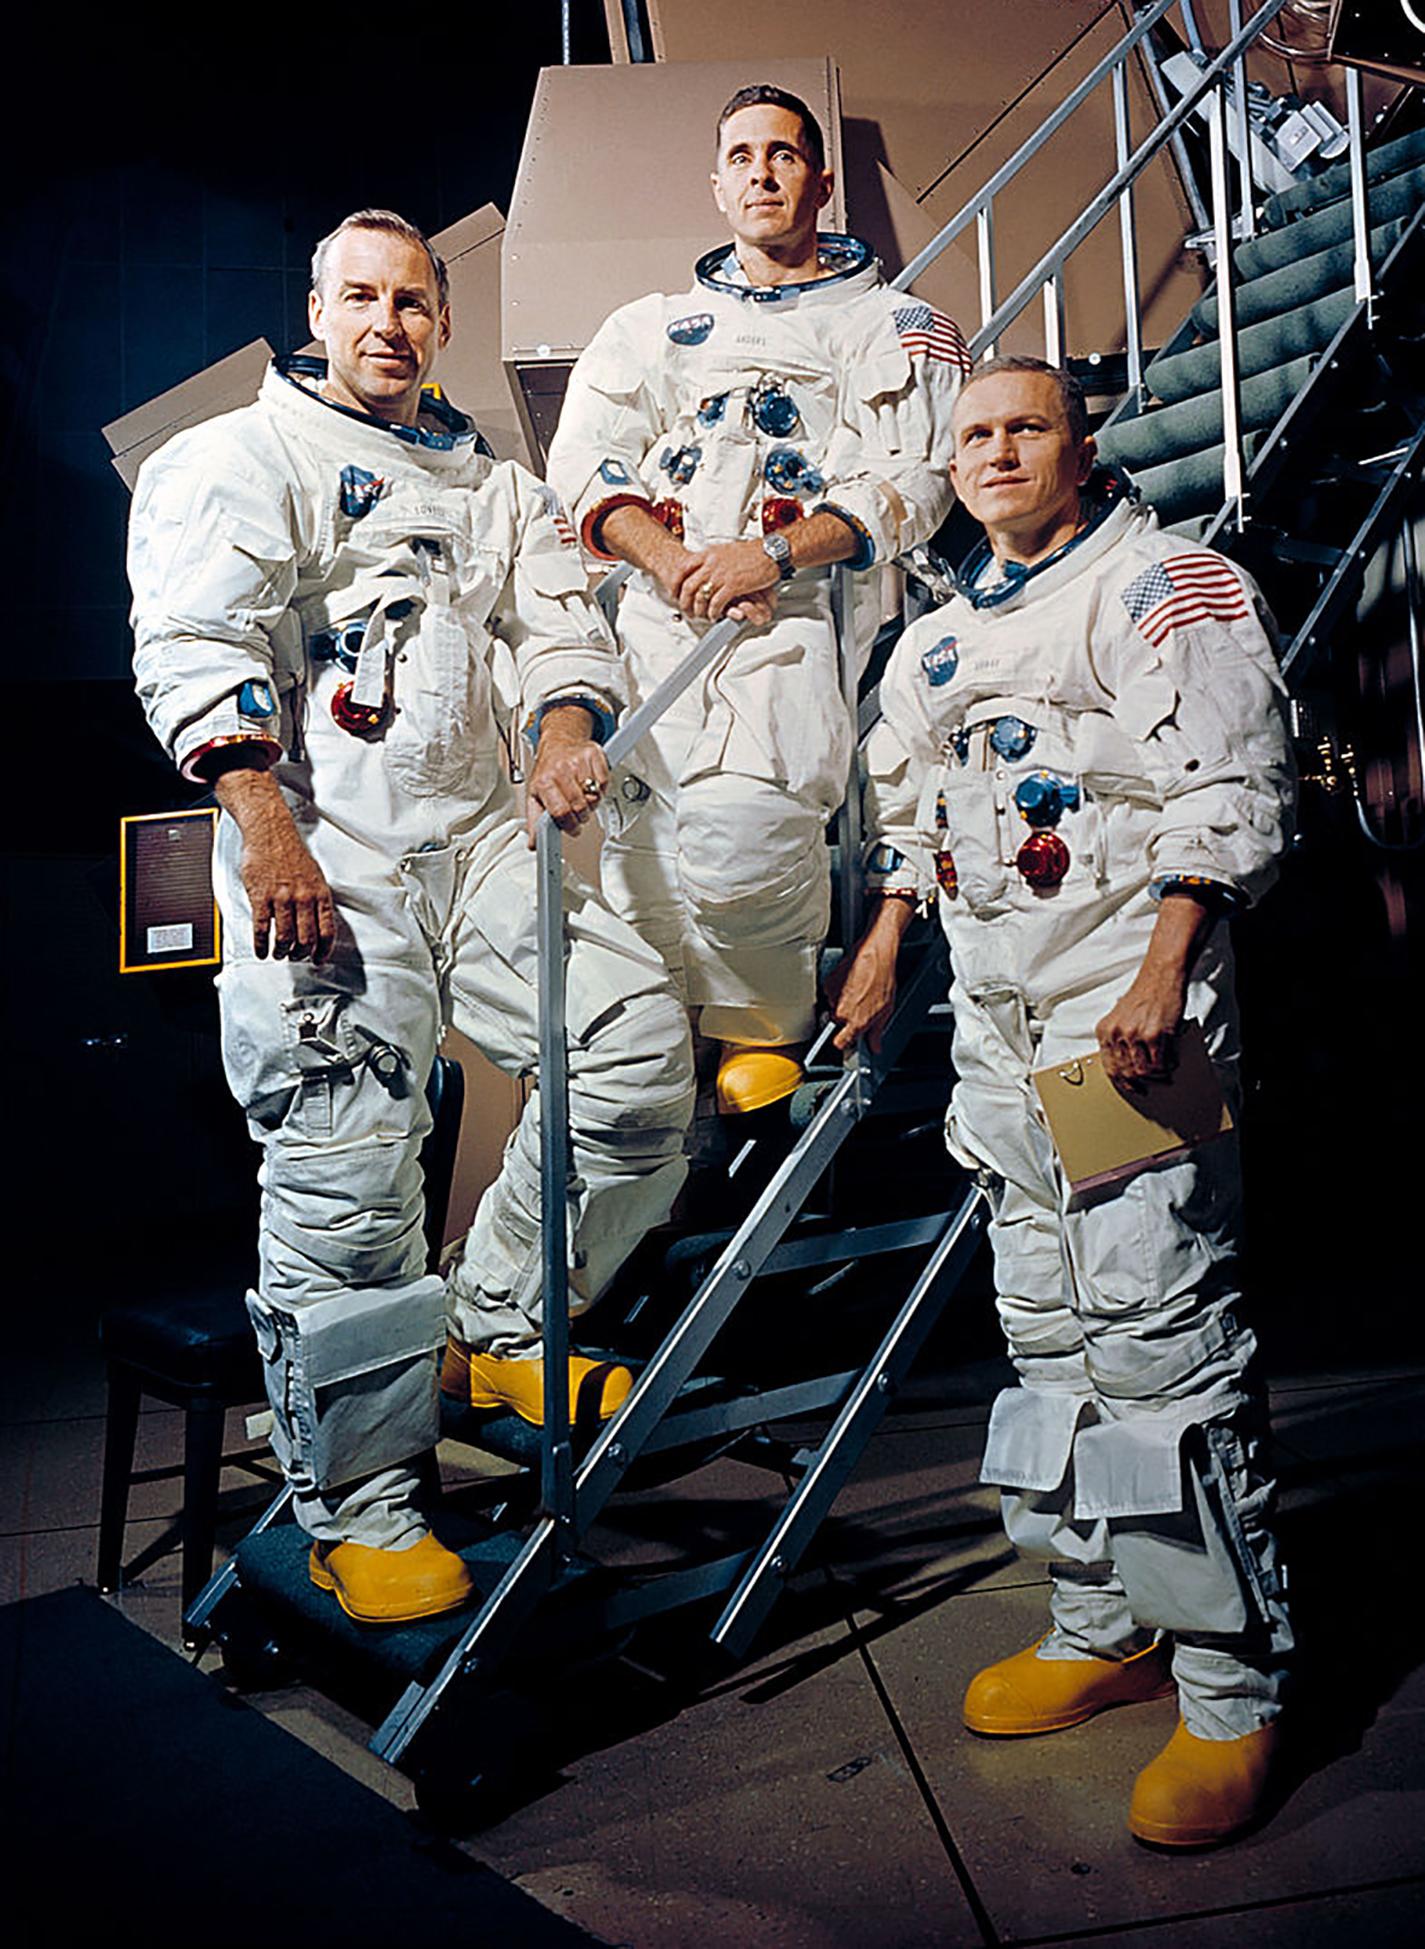 James Lovell Jr., William Anders and Frank Borman, members of the Apollo 8 crew, pose for a photo in their space suits on a Kennedy Space Center simulator Nov. 22, 1968. Apollo 8 was the U.S.’ second manned spaceflight and the first to reach Earth’s moon.